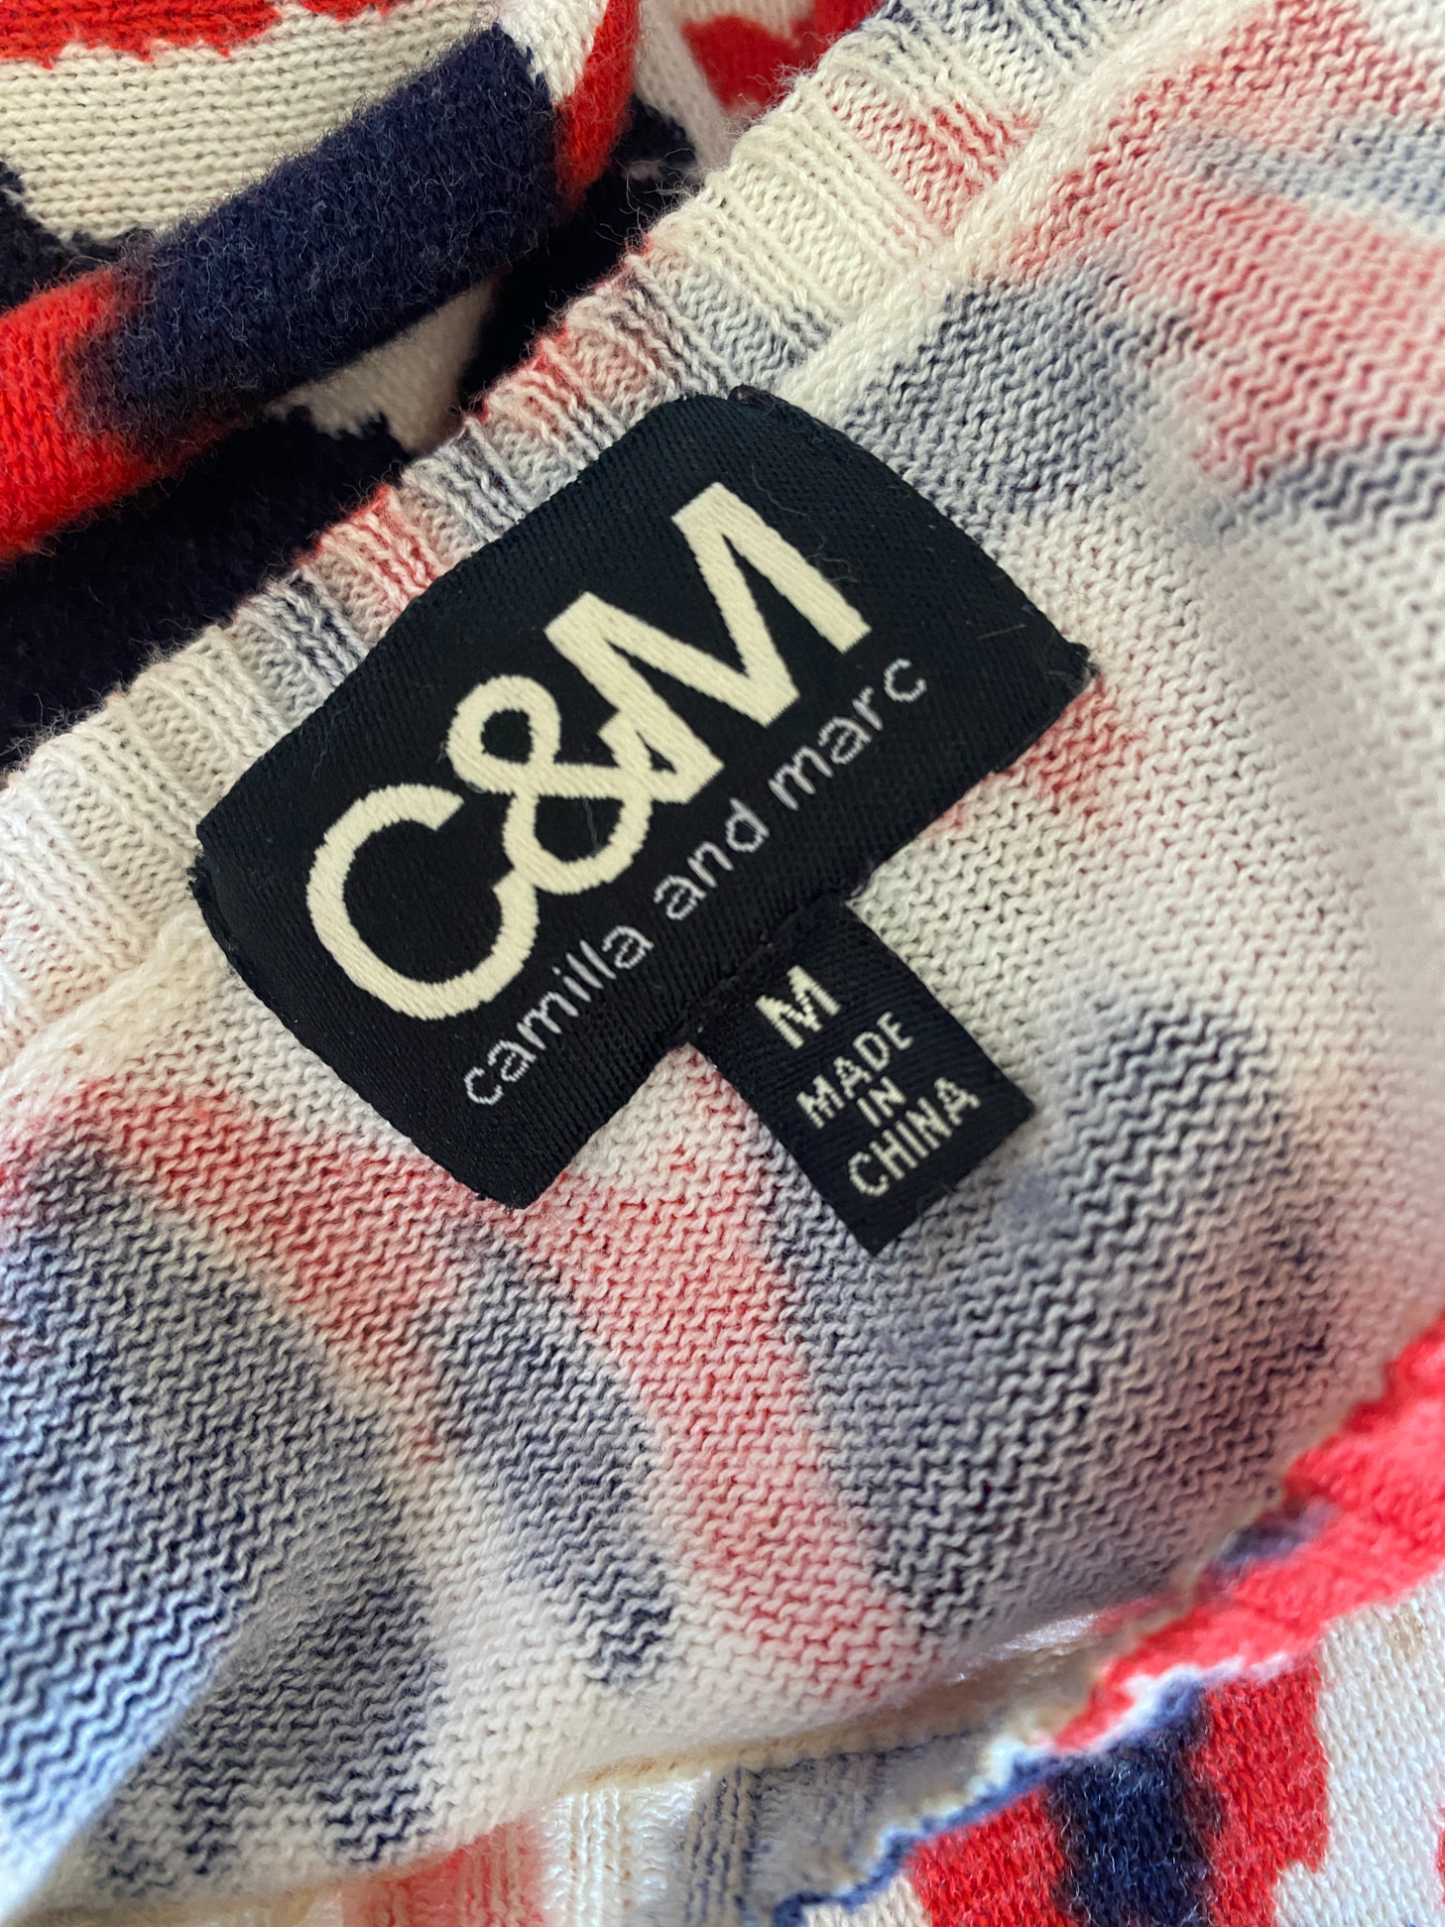 C&M Camilla and Marc Jumper/Sweater | Sz M, Oversized, Red/White/Navy, Cotton